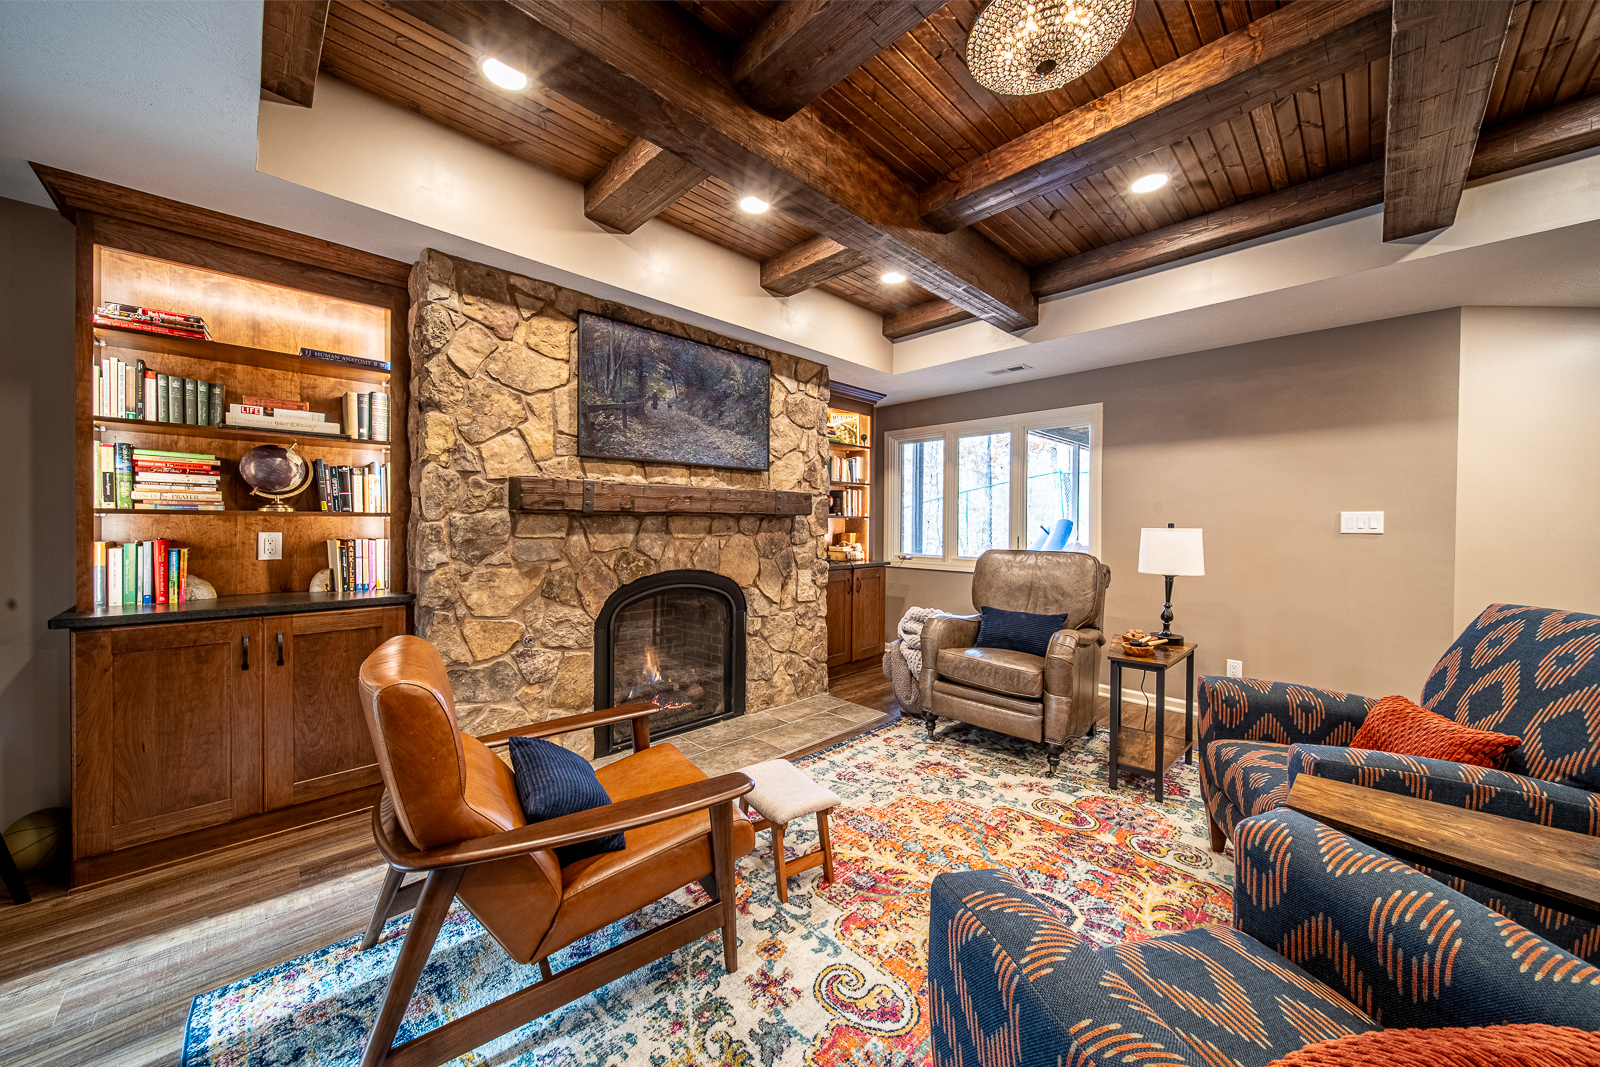 Inviting basement sitting area with elegant fireplace and rustic design on Ripple Creek Drive.